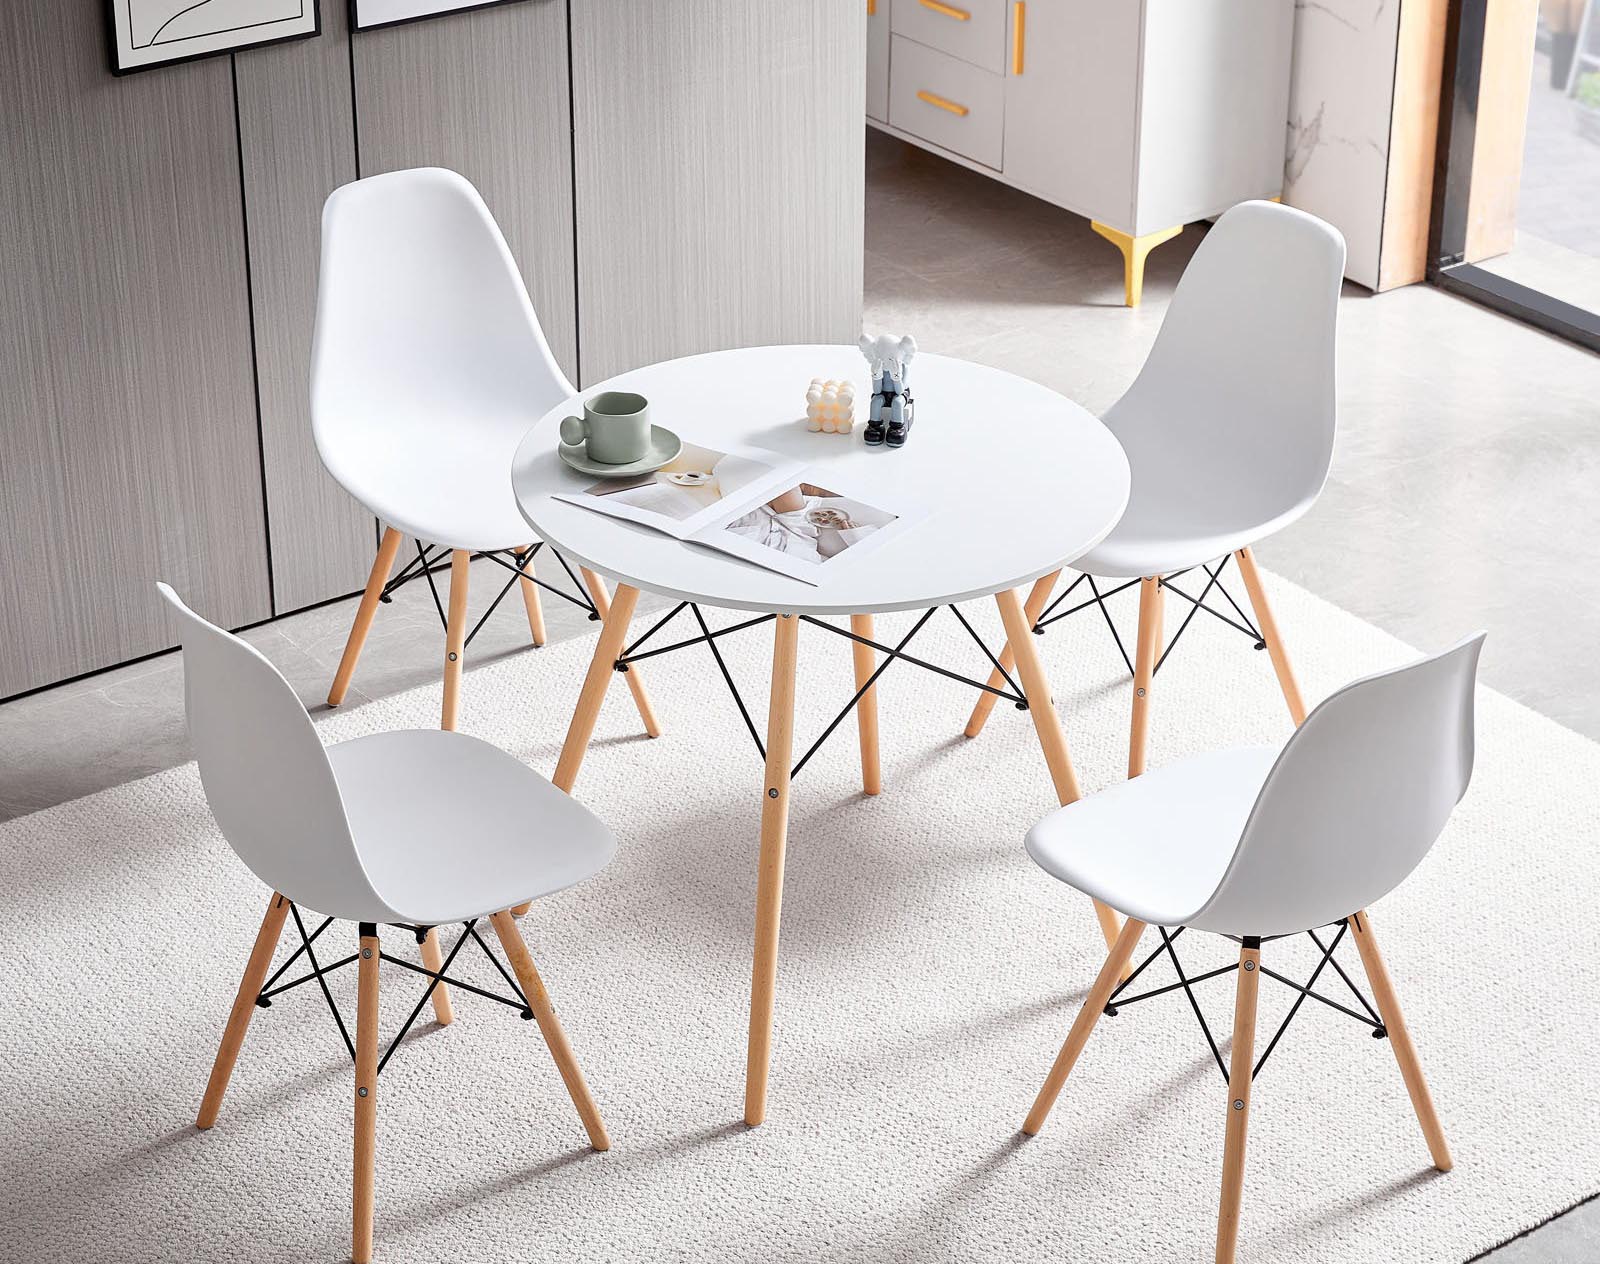 Pieces of Furniture That Will Make Any Room Feel Bigger Option Leggy Dining Set